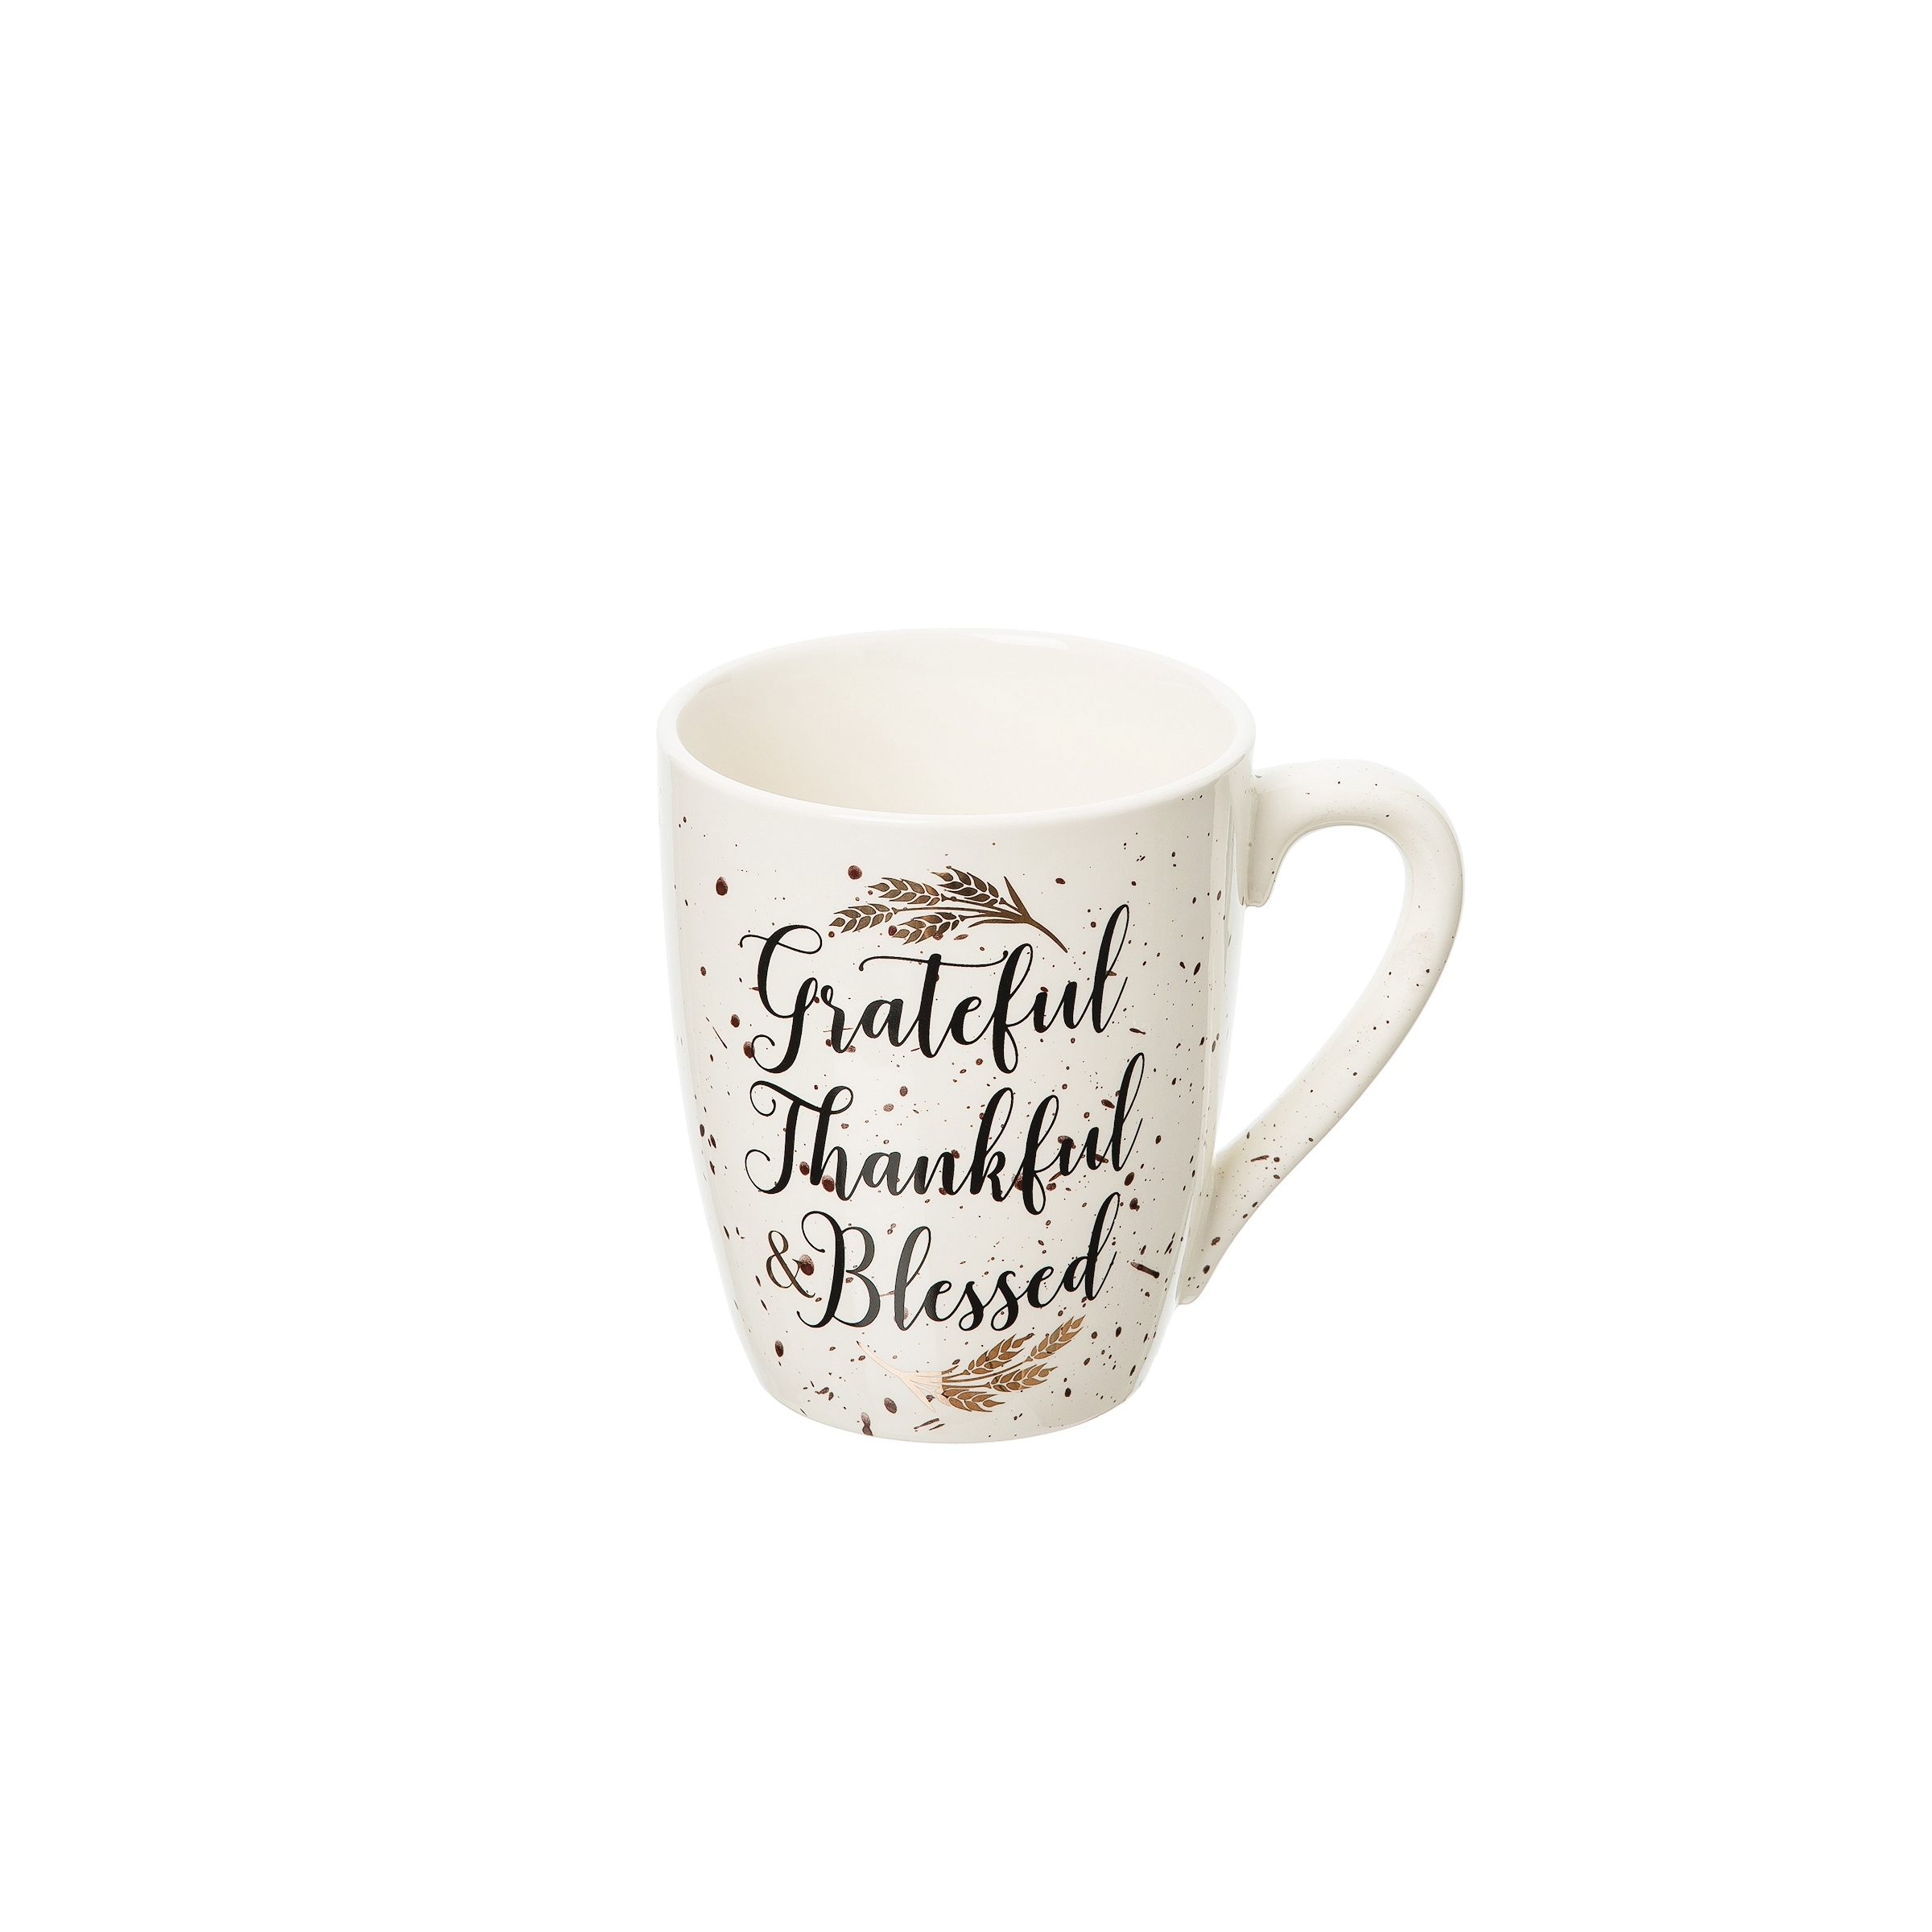 https://ak1.ostkcdn.com/images/products/is/images/direct/5a11c709449768ed0f4763a3dbefd6fe215f4549/Grateful%2C-Thankful%2C-Blessed-Mug.jpg